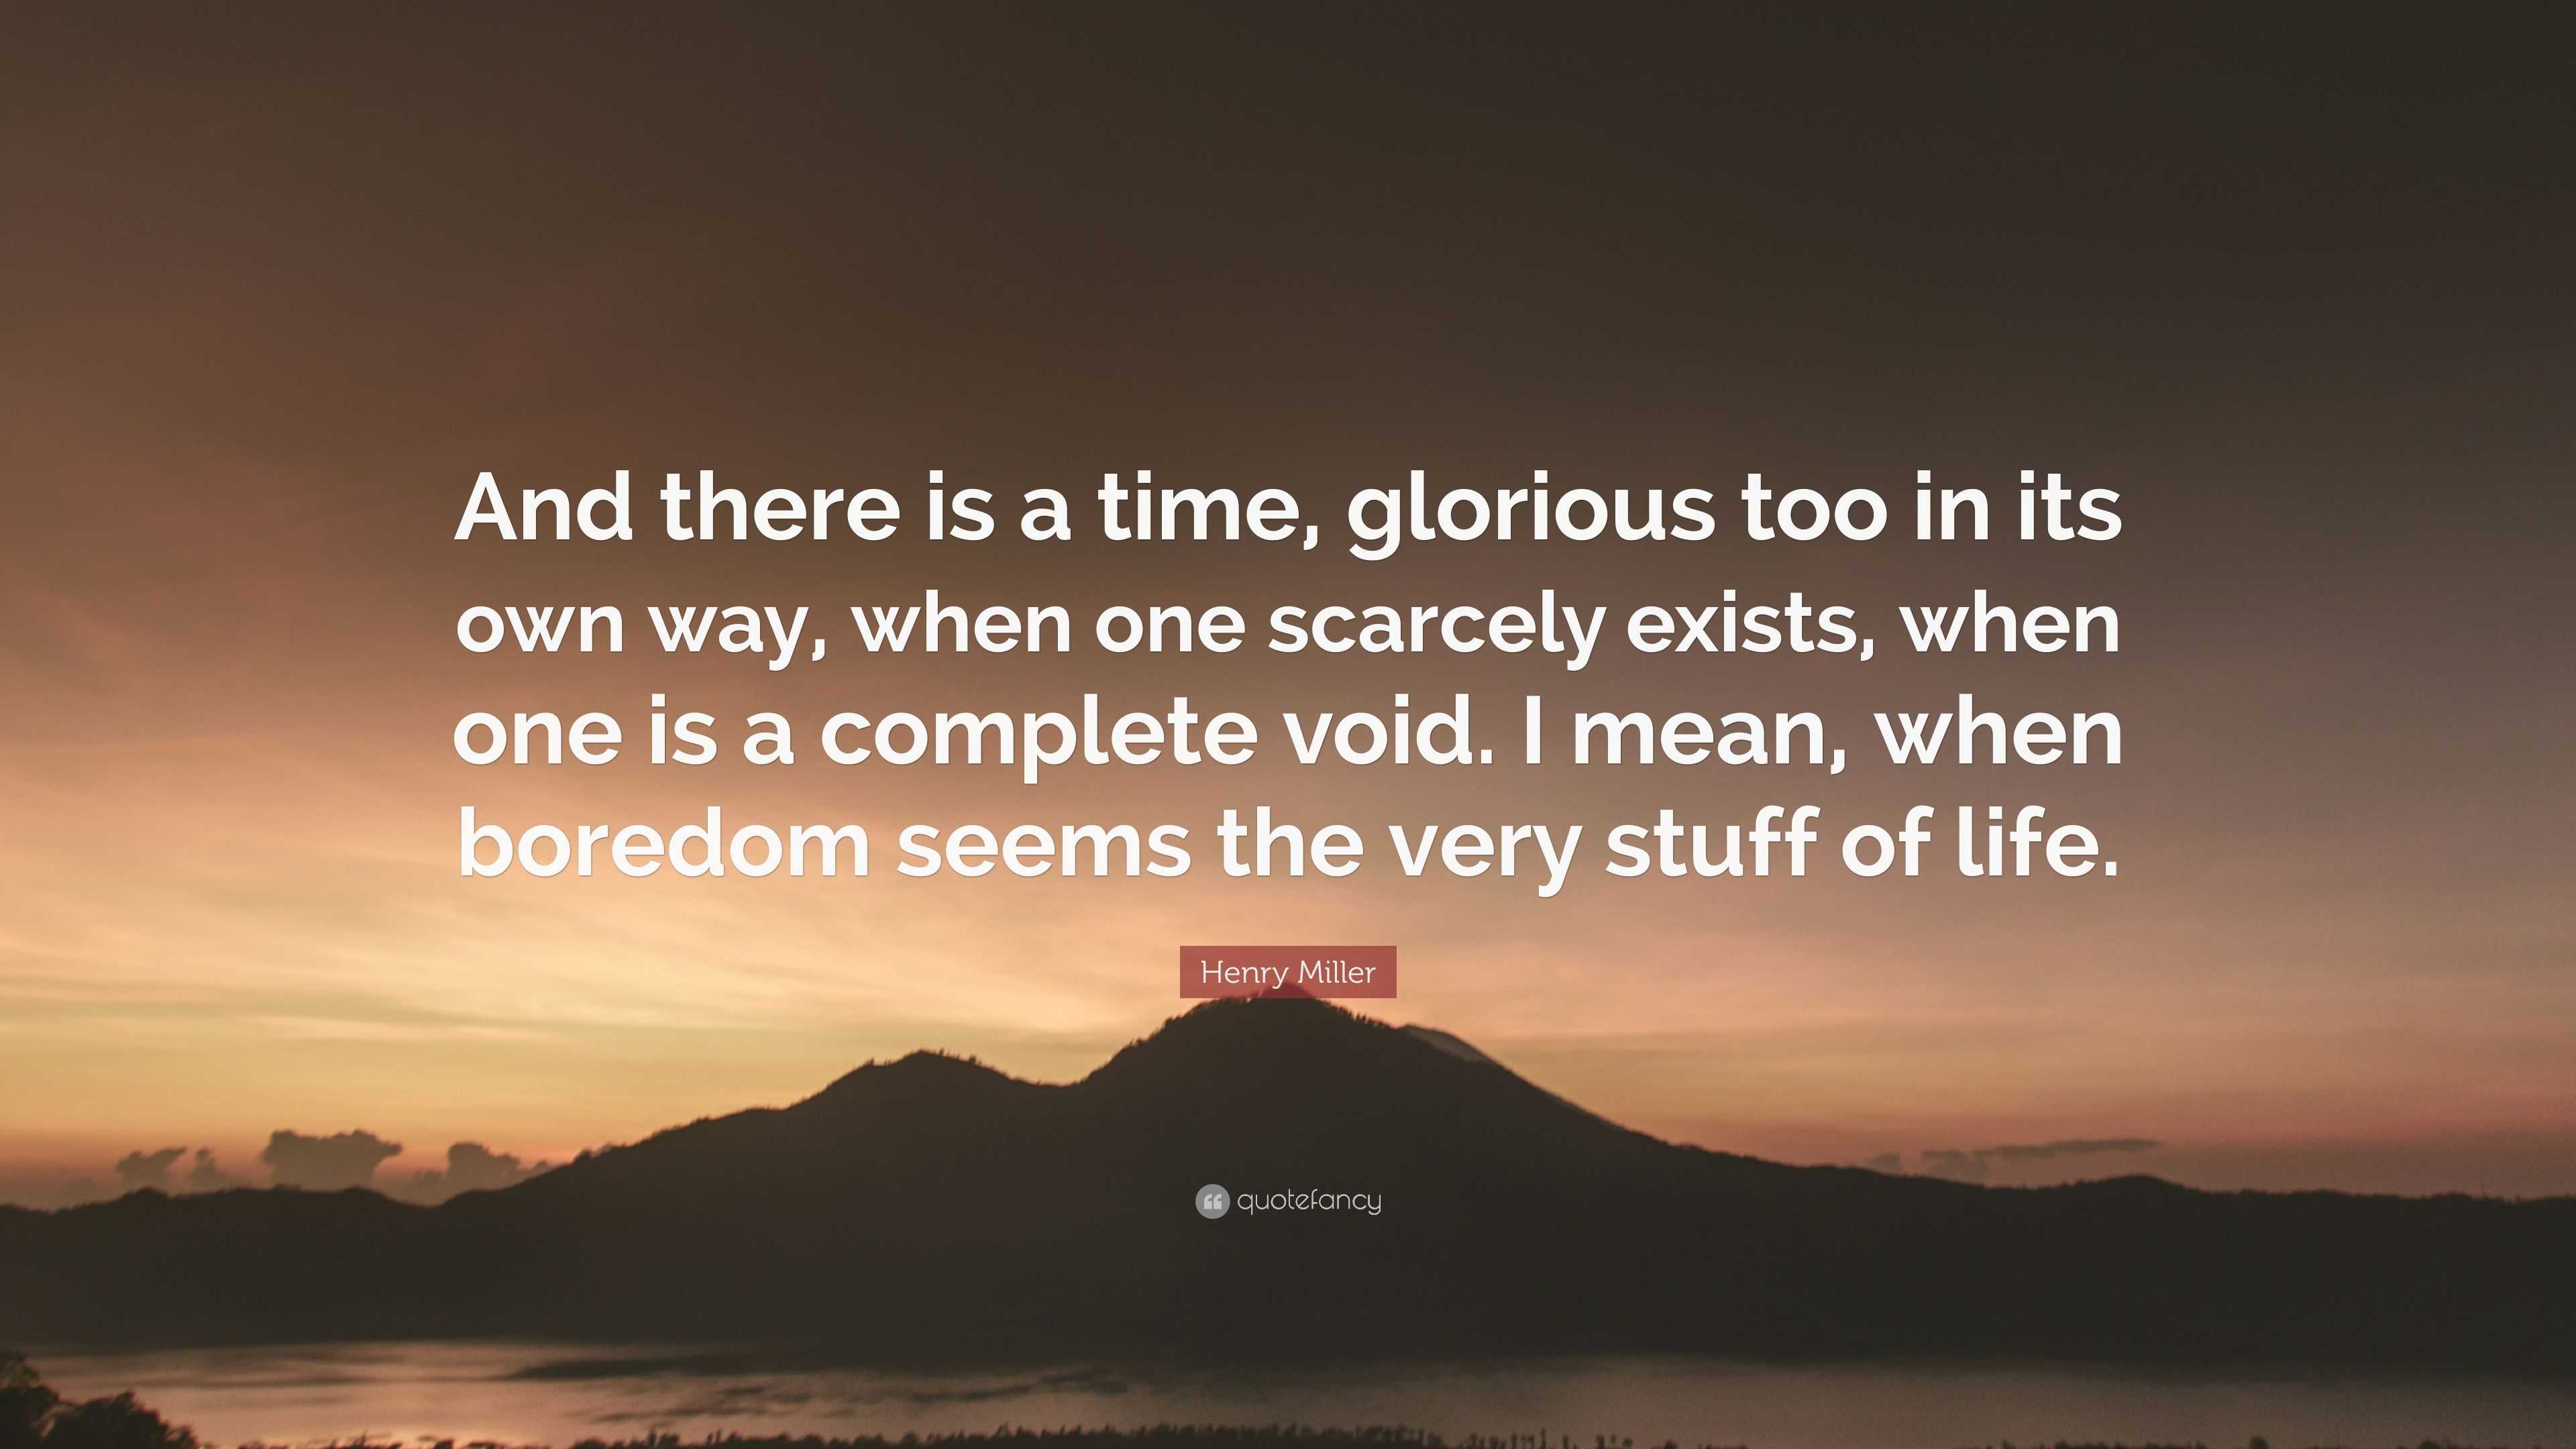 Henry Miller Quote: “And there is a time, glorious too in its own way ...